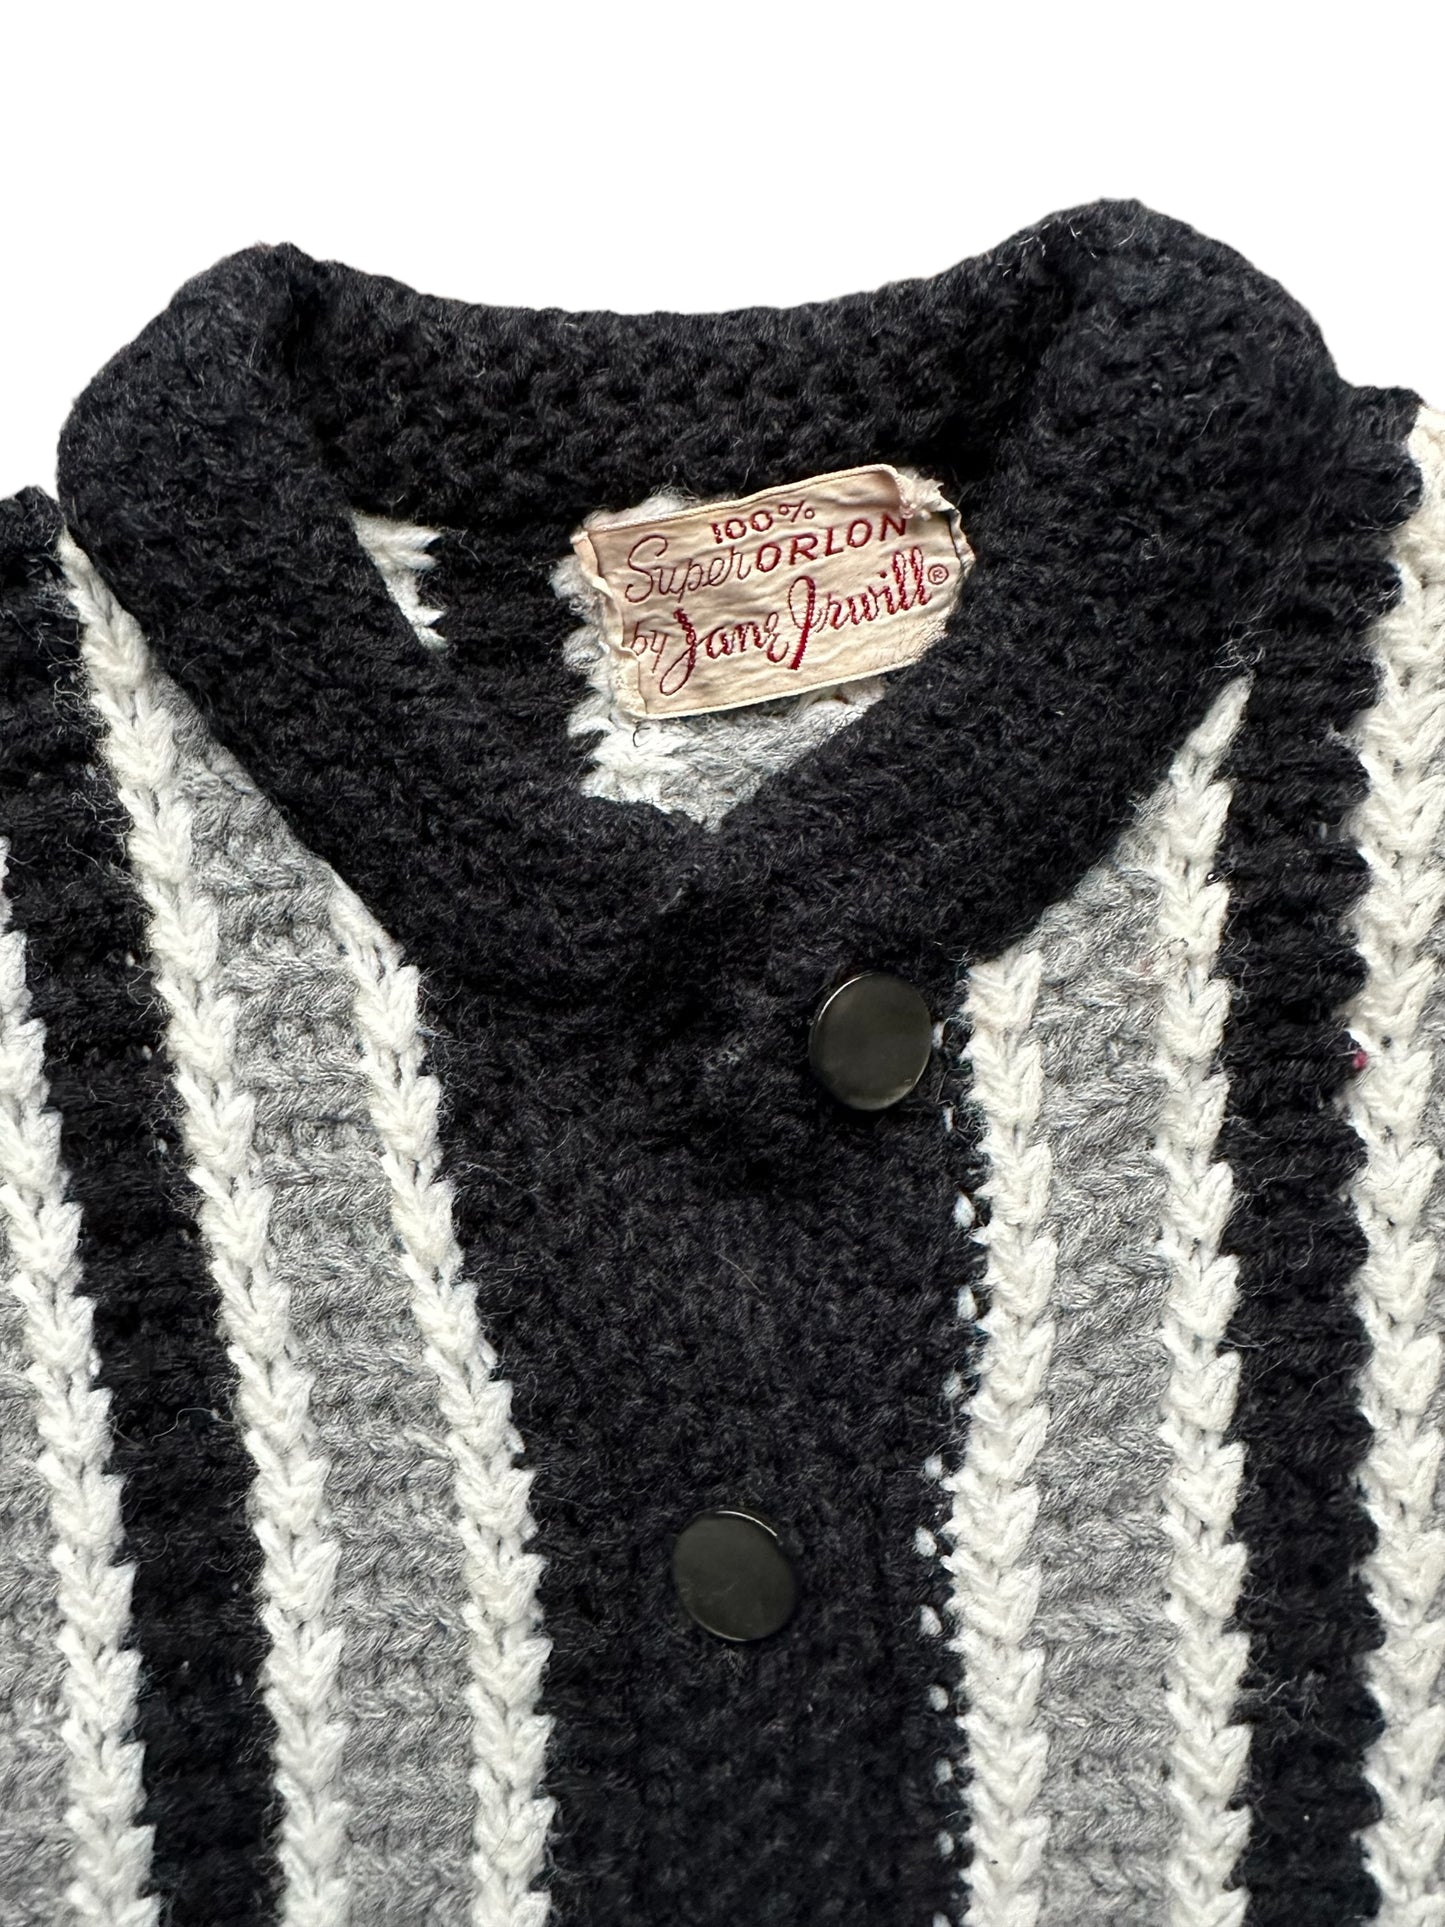 Tag View of Vintage Super Orlon By Jane Irwill Sweater SZ M |  Vintage Sweaters Seattle | Barn Owl Vintage Seattle